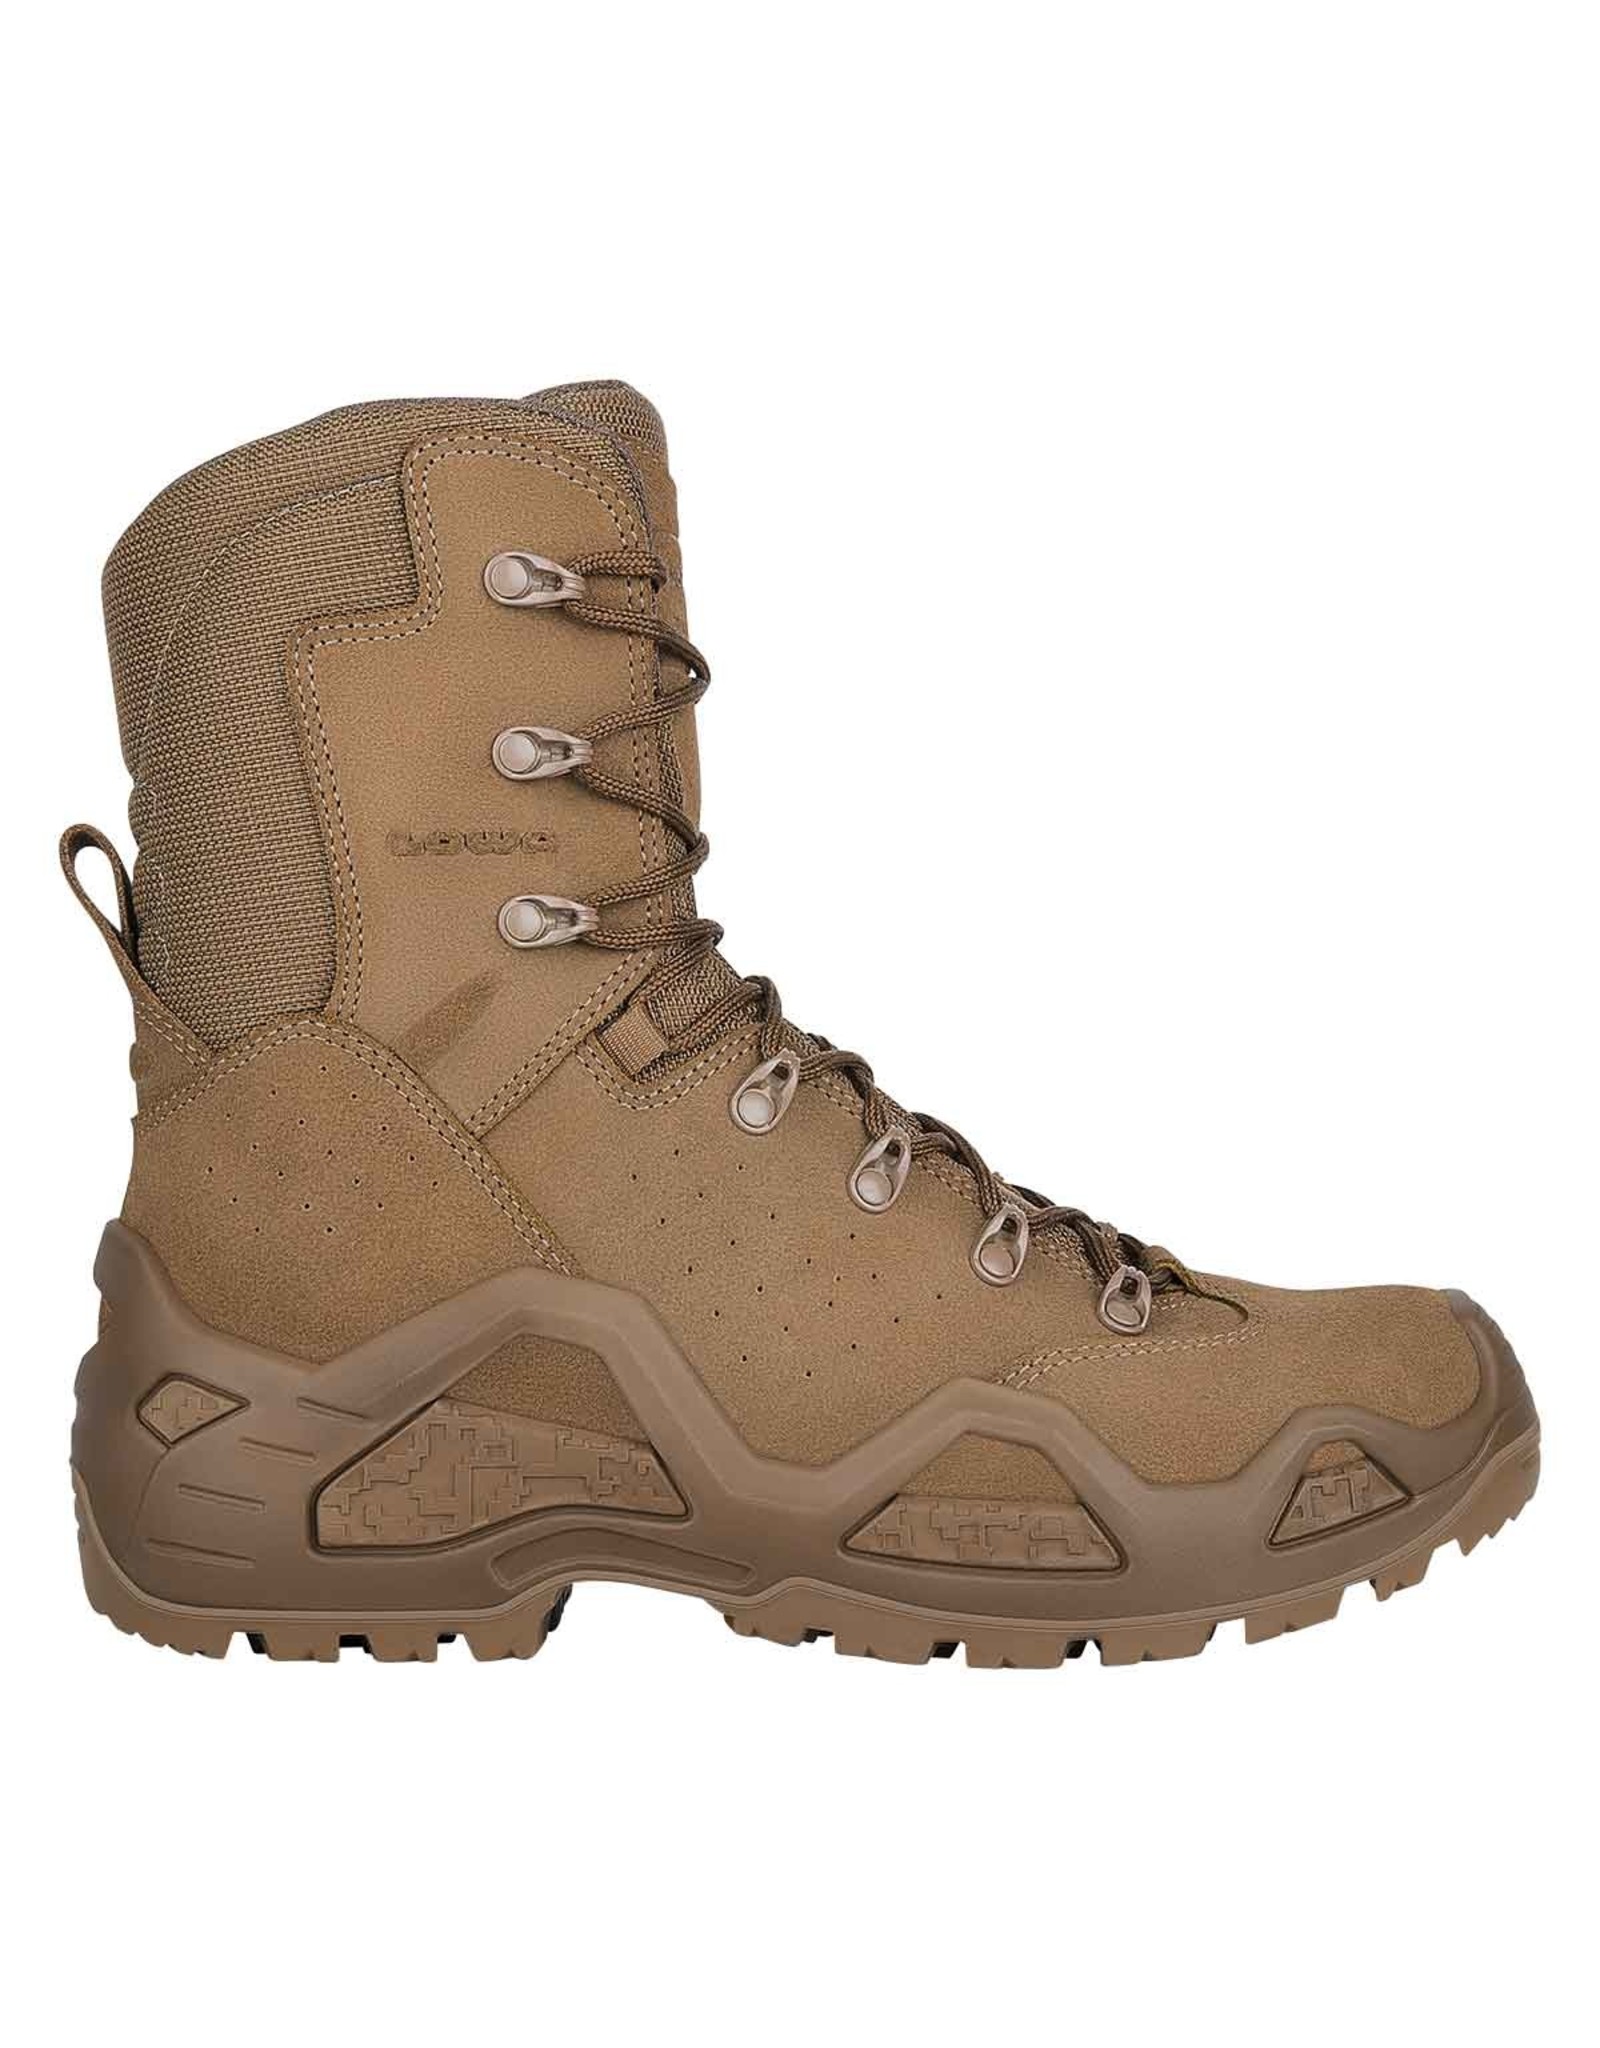 LOWA Z-8S WS C COYOTE TACTICAL BOOT